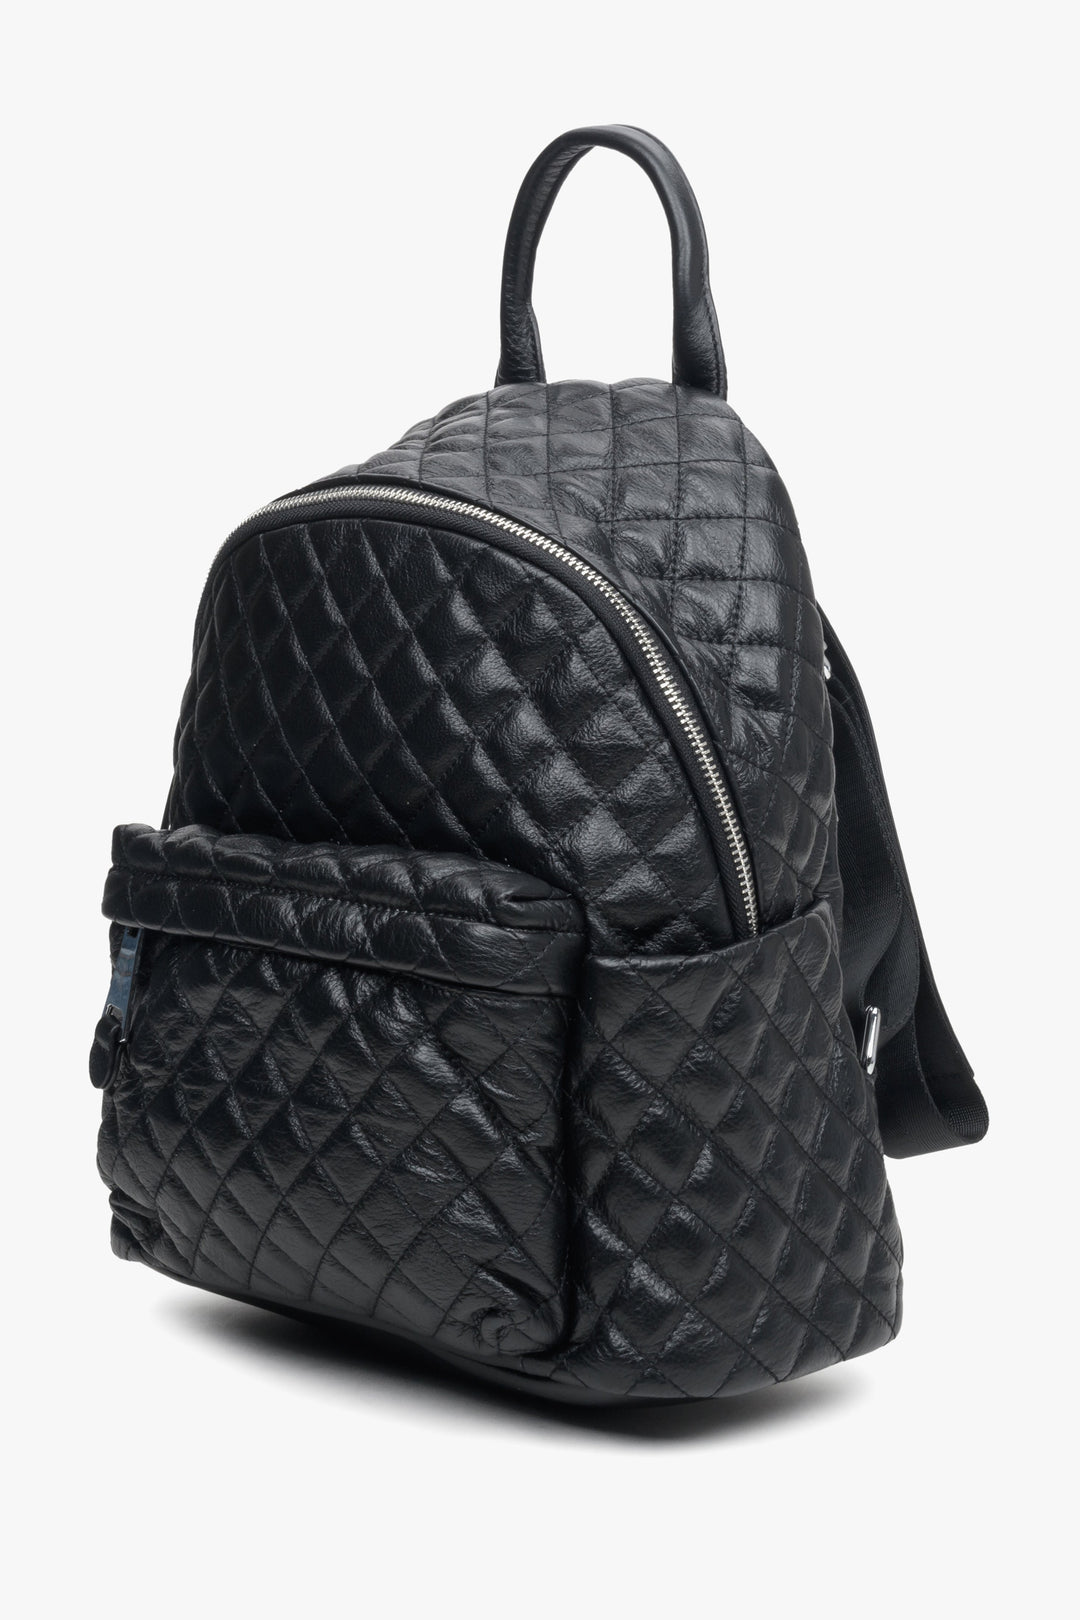 Black quilted leather women's backpack by Estro - side view of the model.